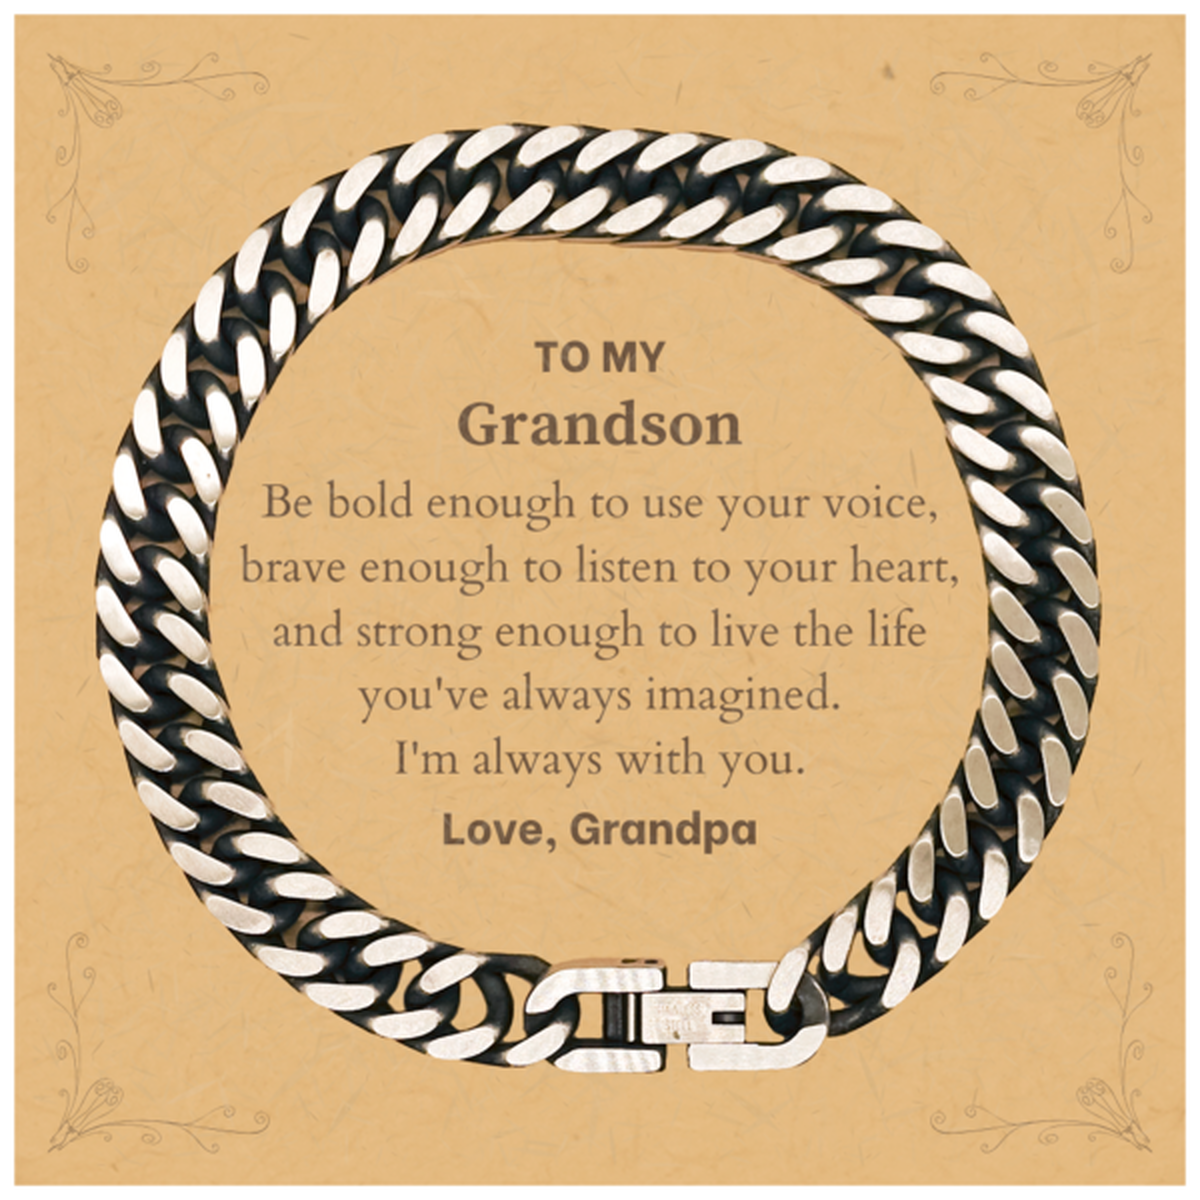 Keepsake Grandson Cuban Link Chain Bracelet Gift Idea Graduation Christmas Birthday Grandson from Grandpa, Grandson Be bold enough to use your voice, brave enough to listen to your heart. Love, Grandpa